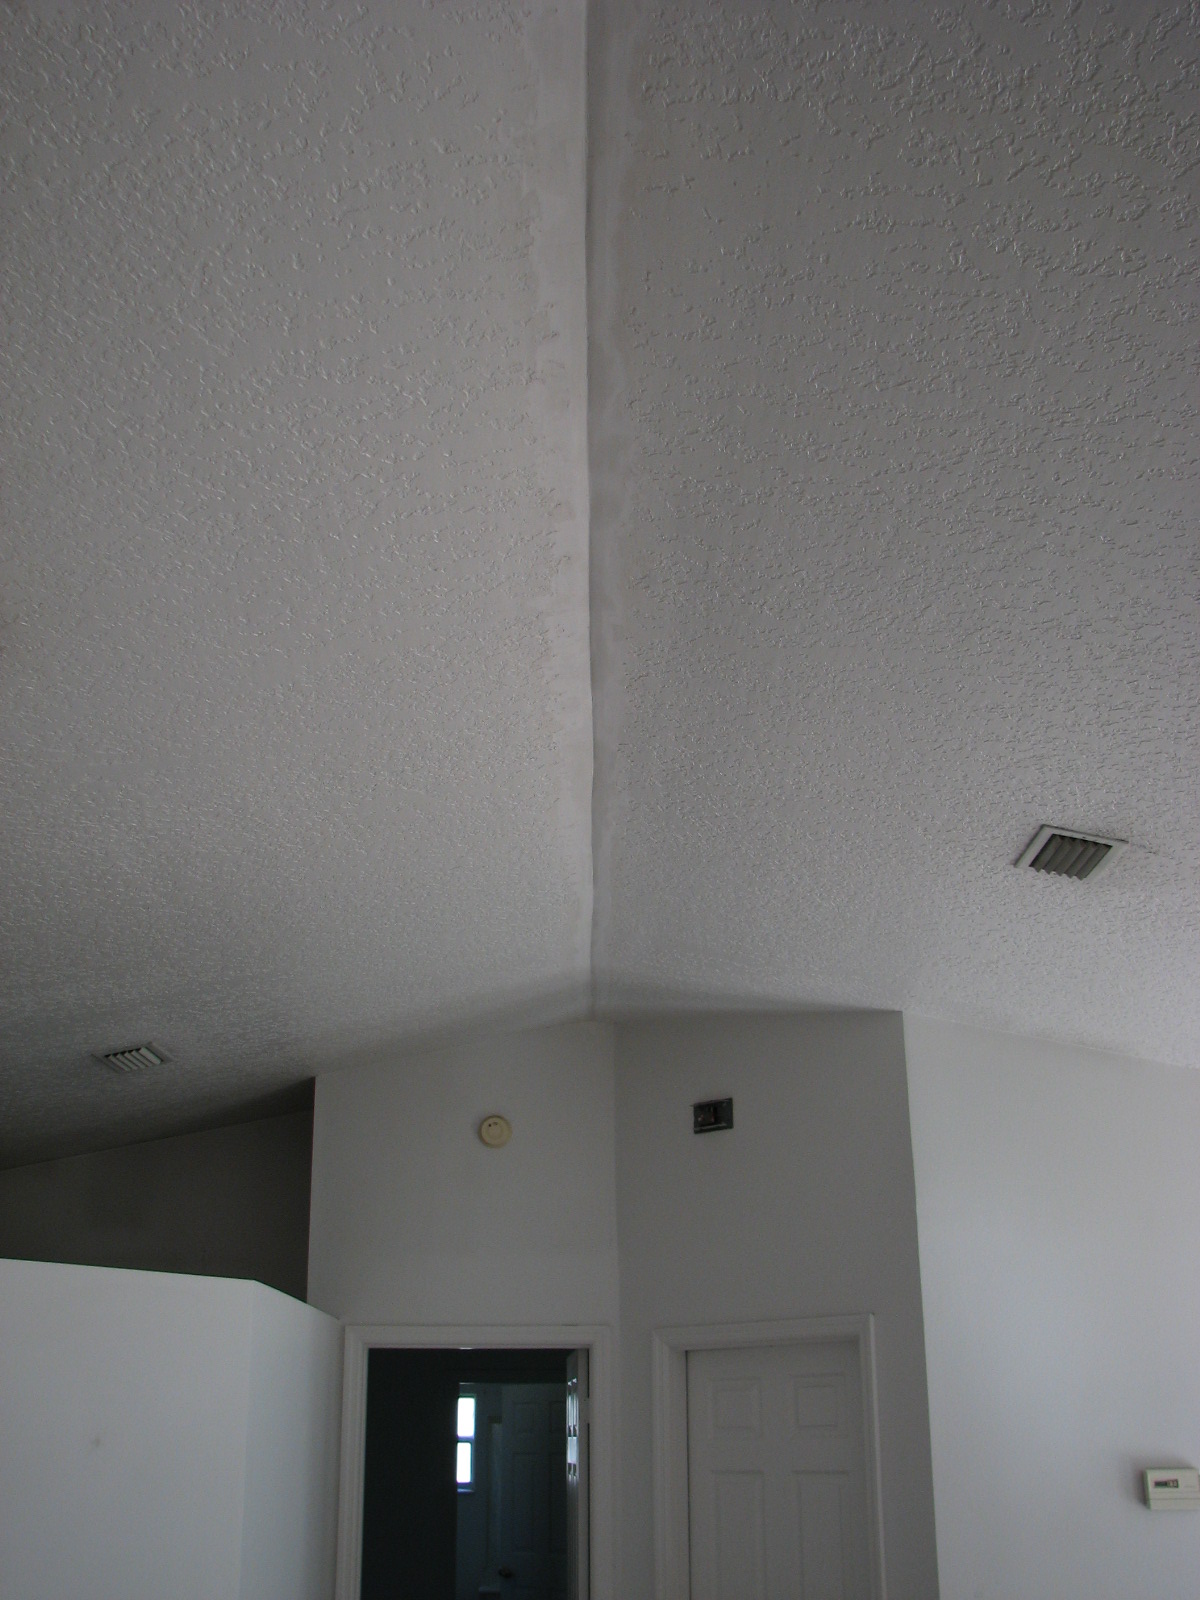 Vaulted Ceiling Repair Knockdown Texture Matching By Peck Drywall